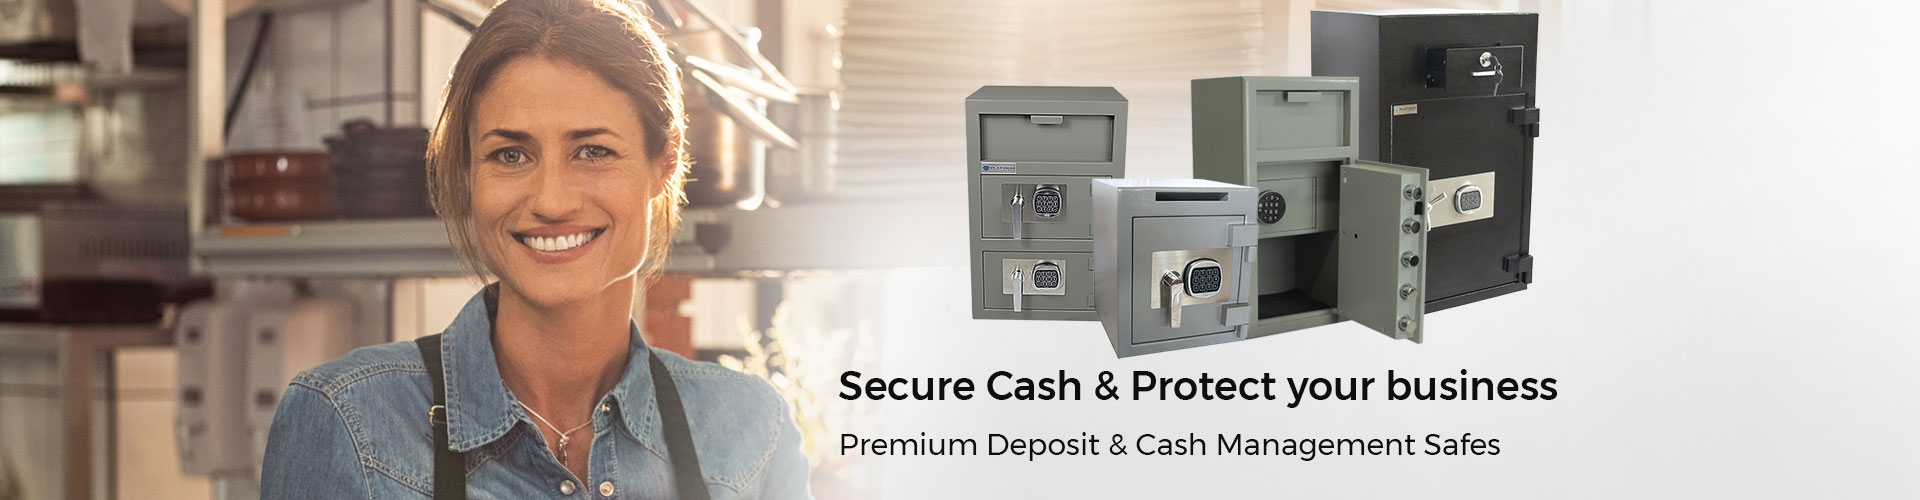 Secure cash and protect your business with premium deposit and cash management safes.